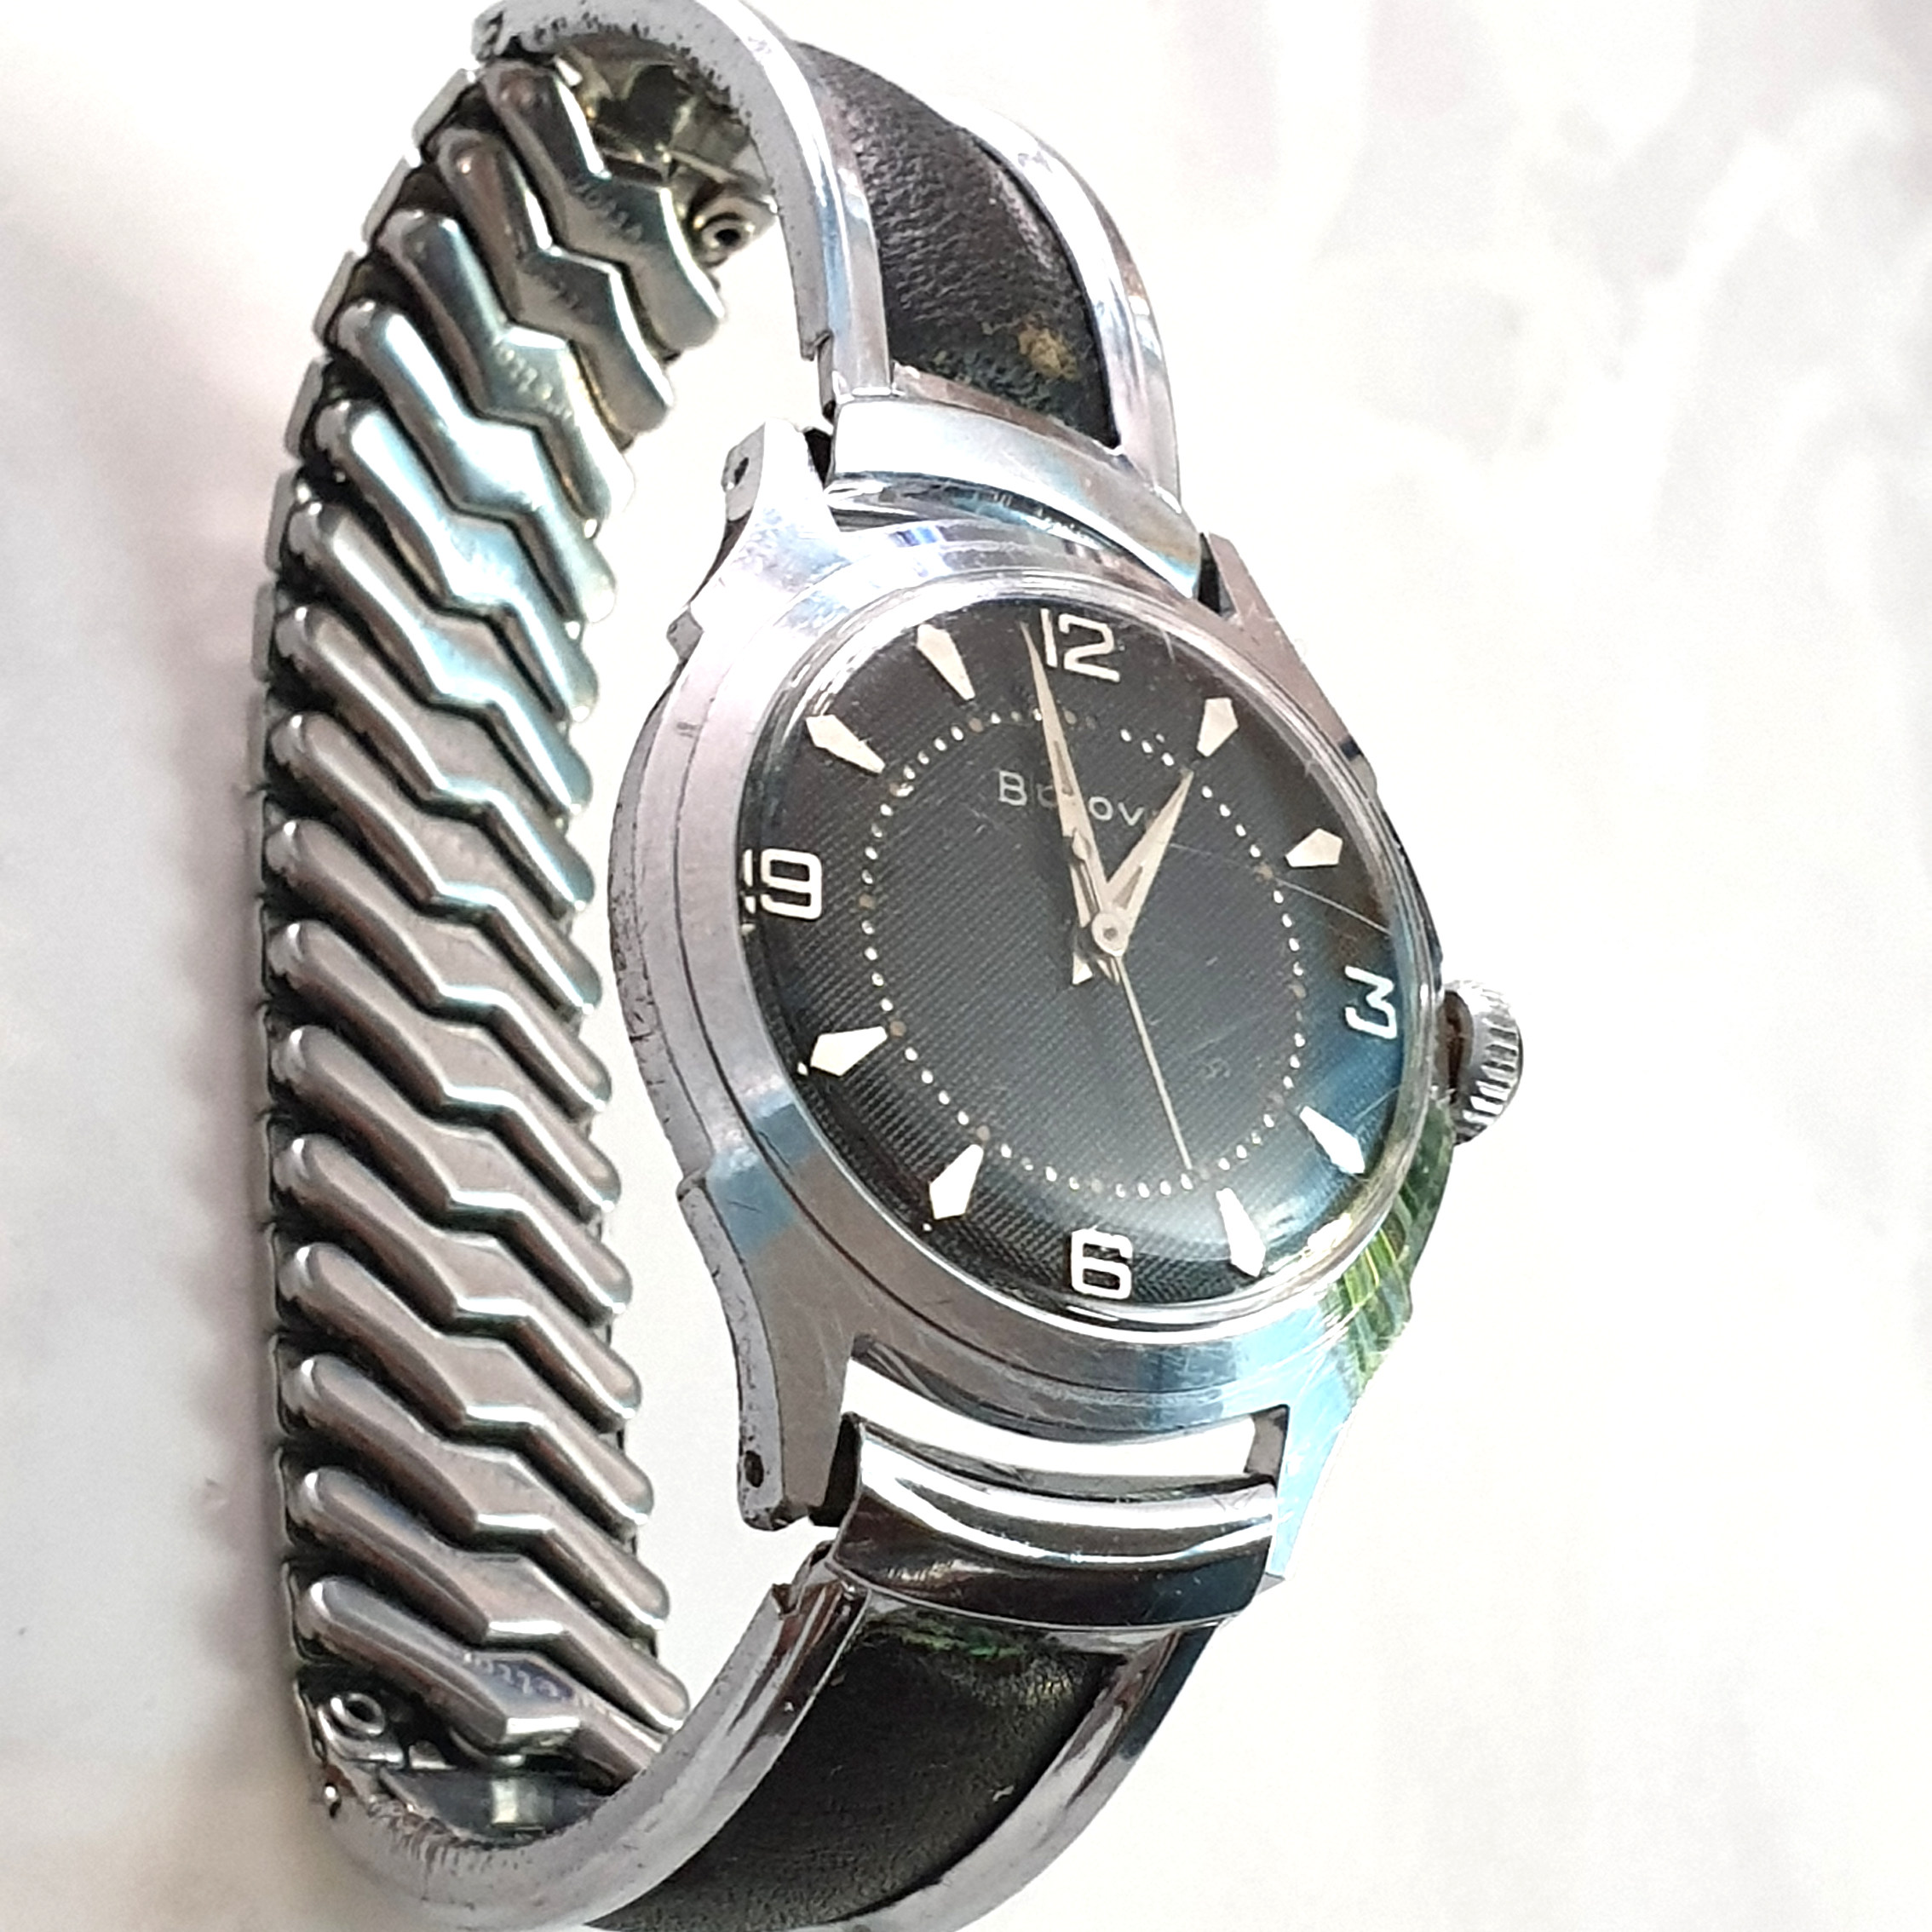 BULOVA MANUAL WIND WRISTWATCH WITH BLACK WAFFLE/HONEYCOMB DIAL IN CHROME PLATE CASE WITH ORIGINAL - Image 5 of 12